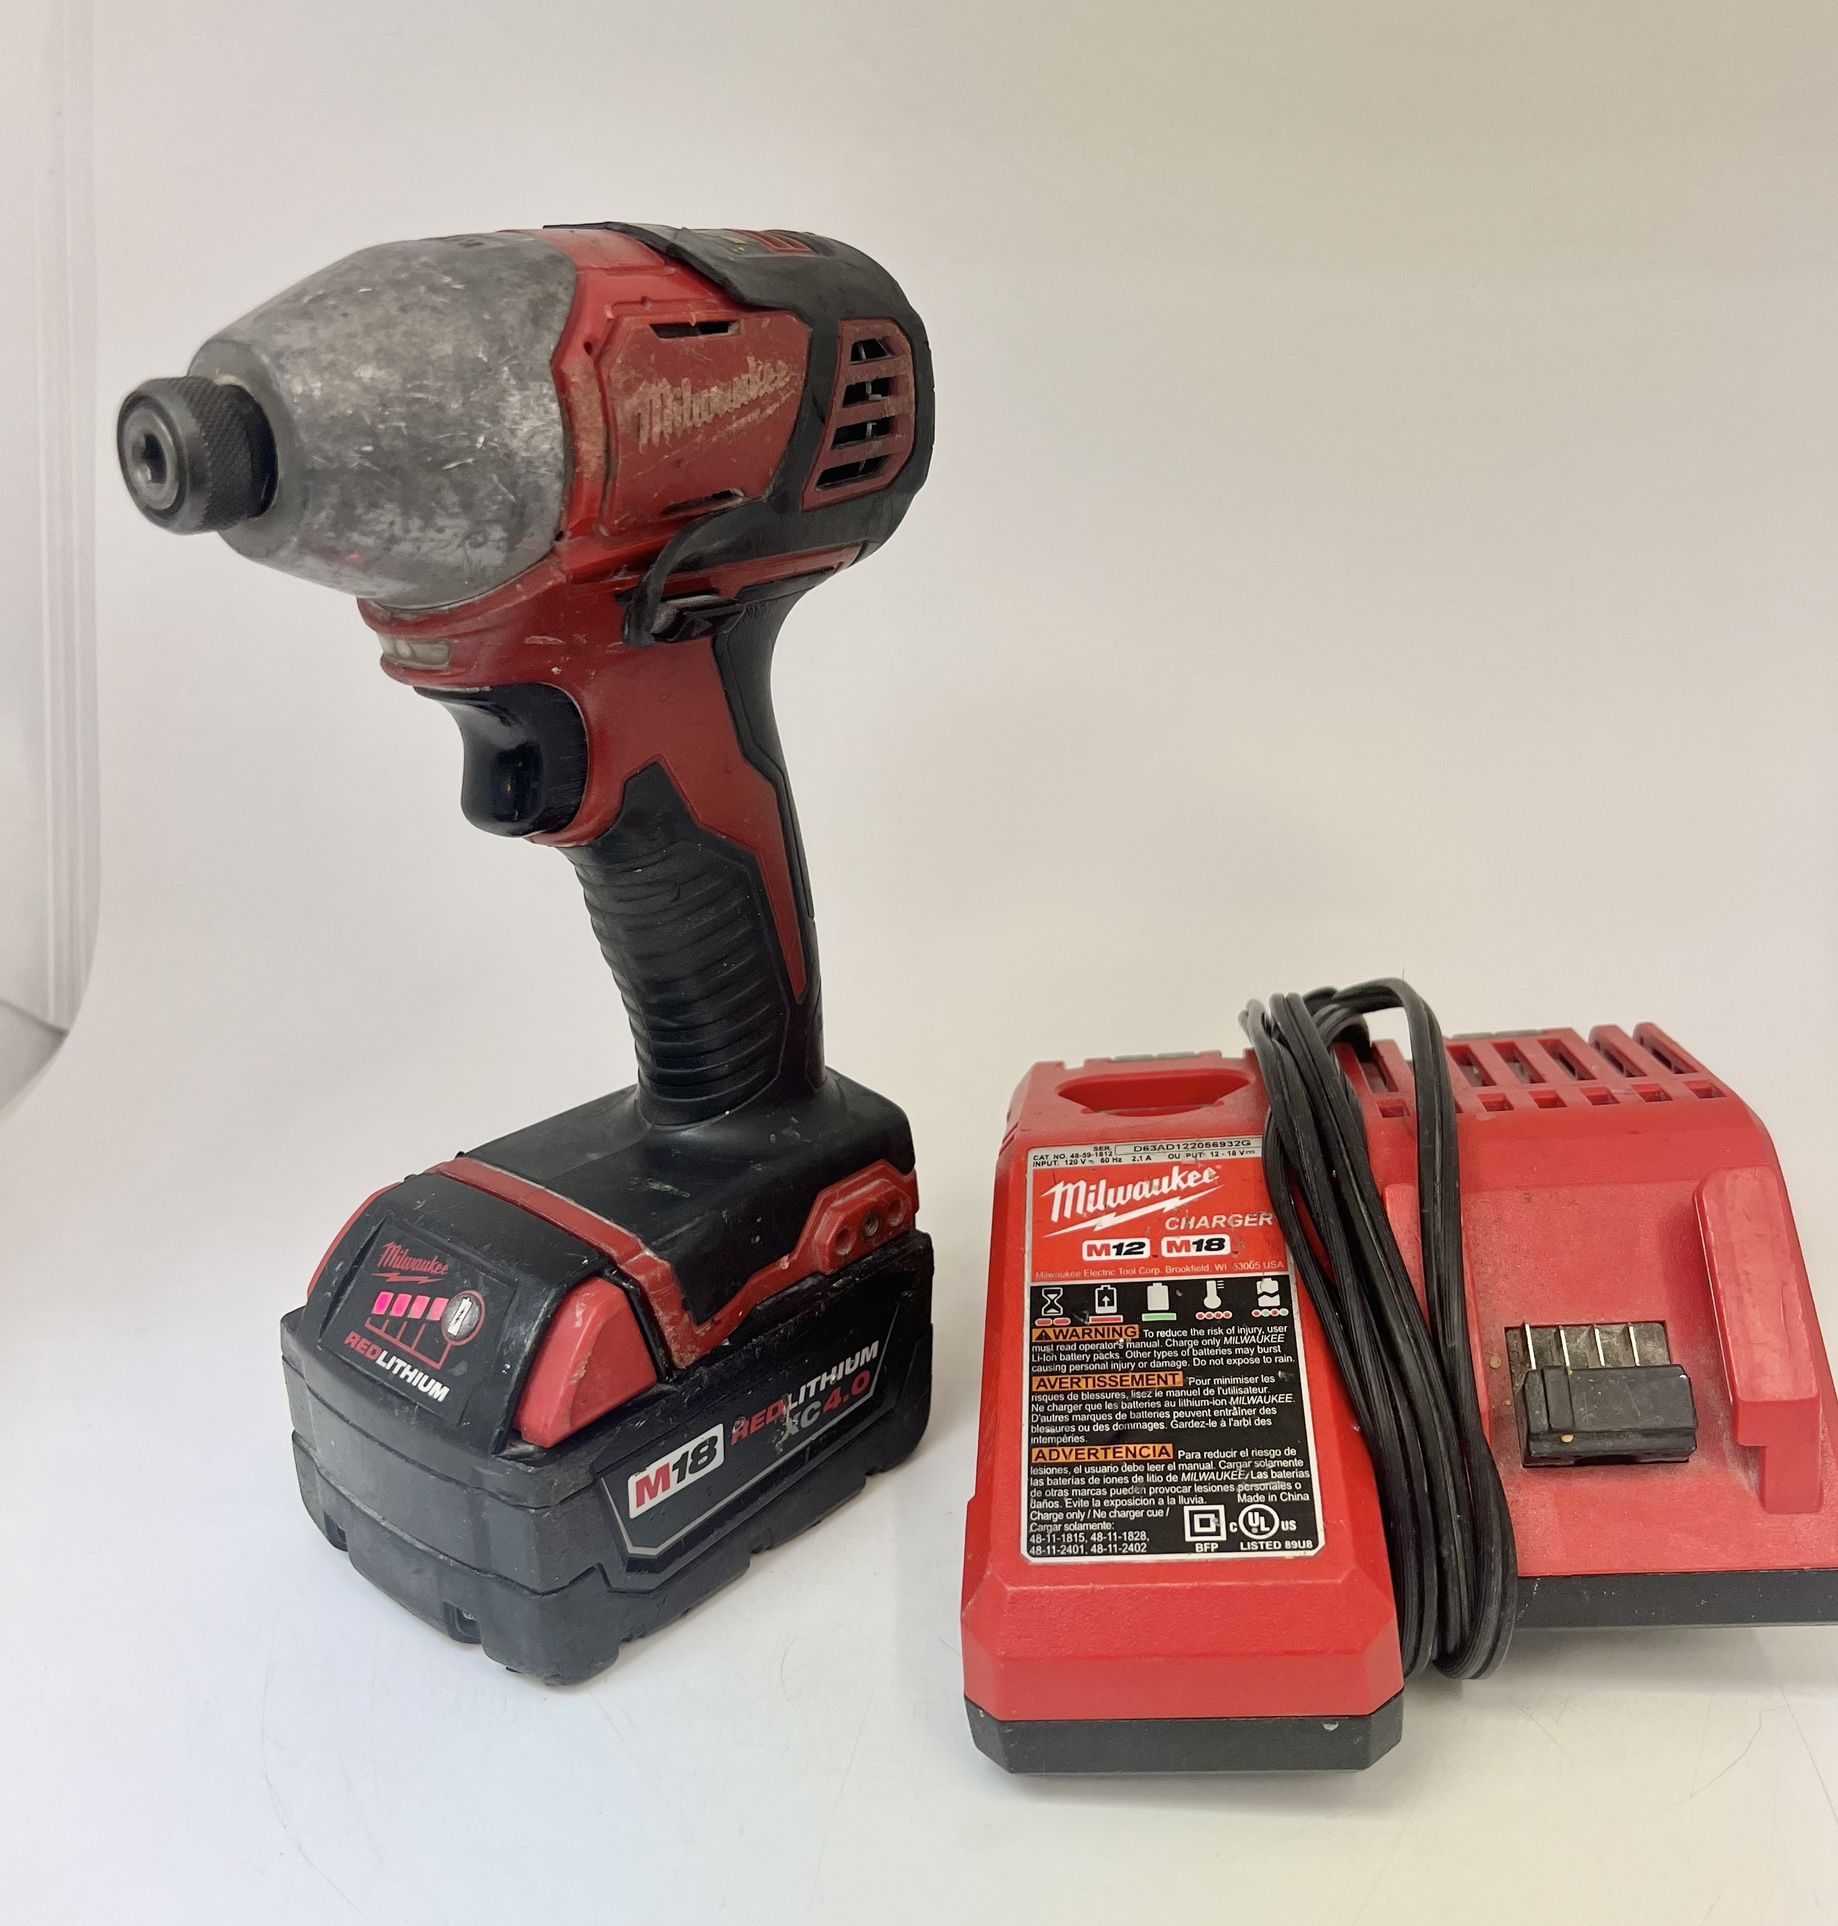 Milwaukee 2656-20 18V Cordless Impact Driver with Battery & Charger 